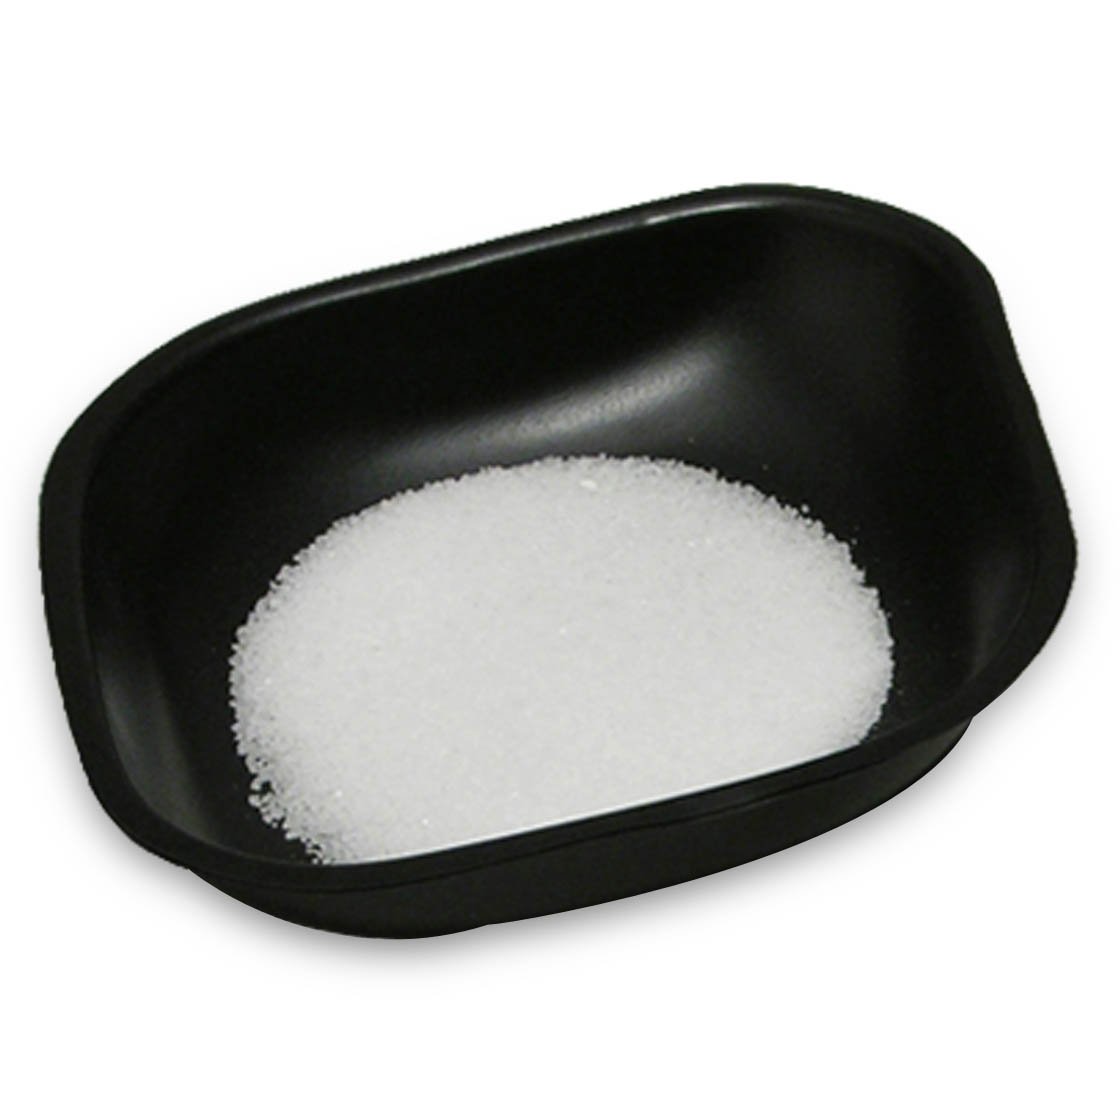 100mL Black Antistatic Polystyrene Diamond Shaped Weigh Boat (Pack of 250)